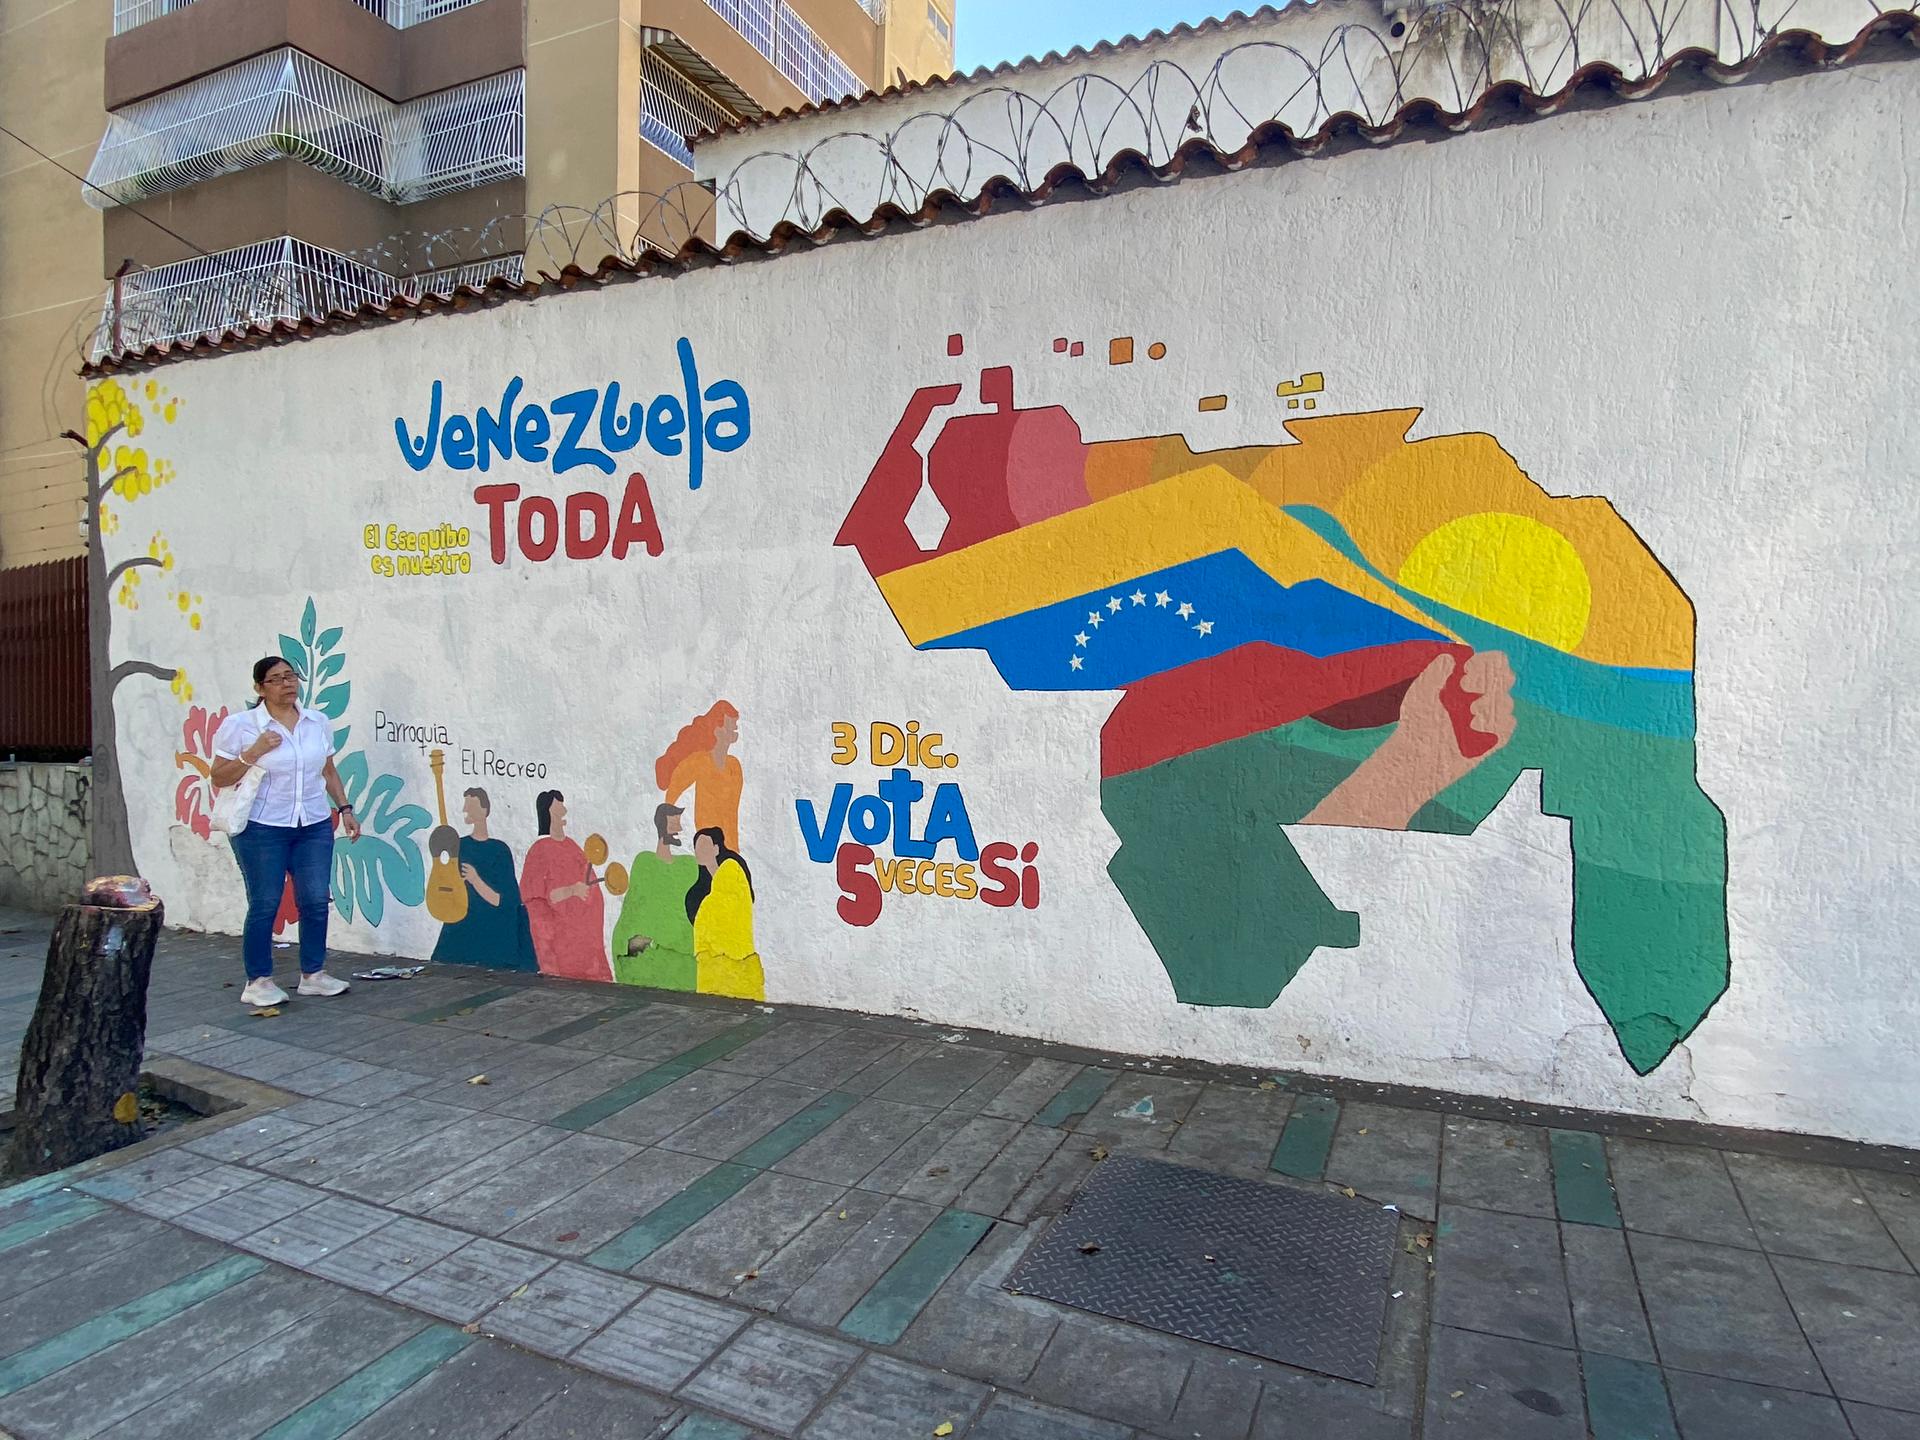 A colorful mural in Caracas depicts a map of Venezuela that includes the disputed Essequibo region. It's the long strip of land to the right of the rising sun.